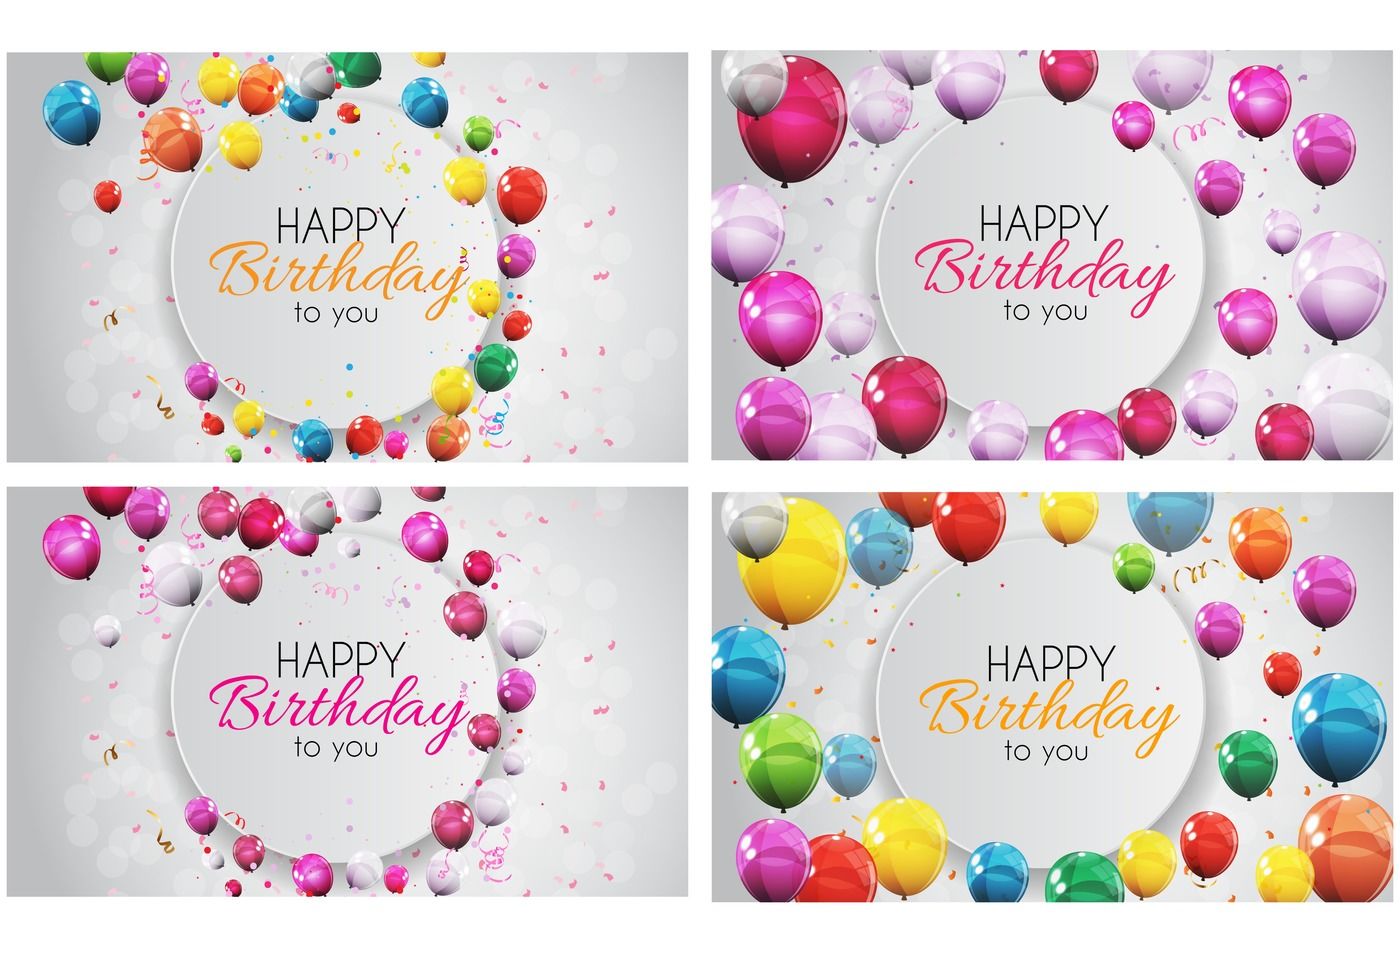 Color glossy happy birthday balloons banner Vector Image